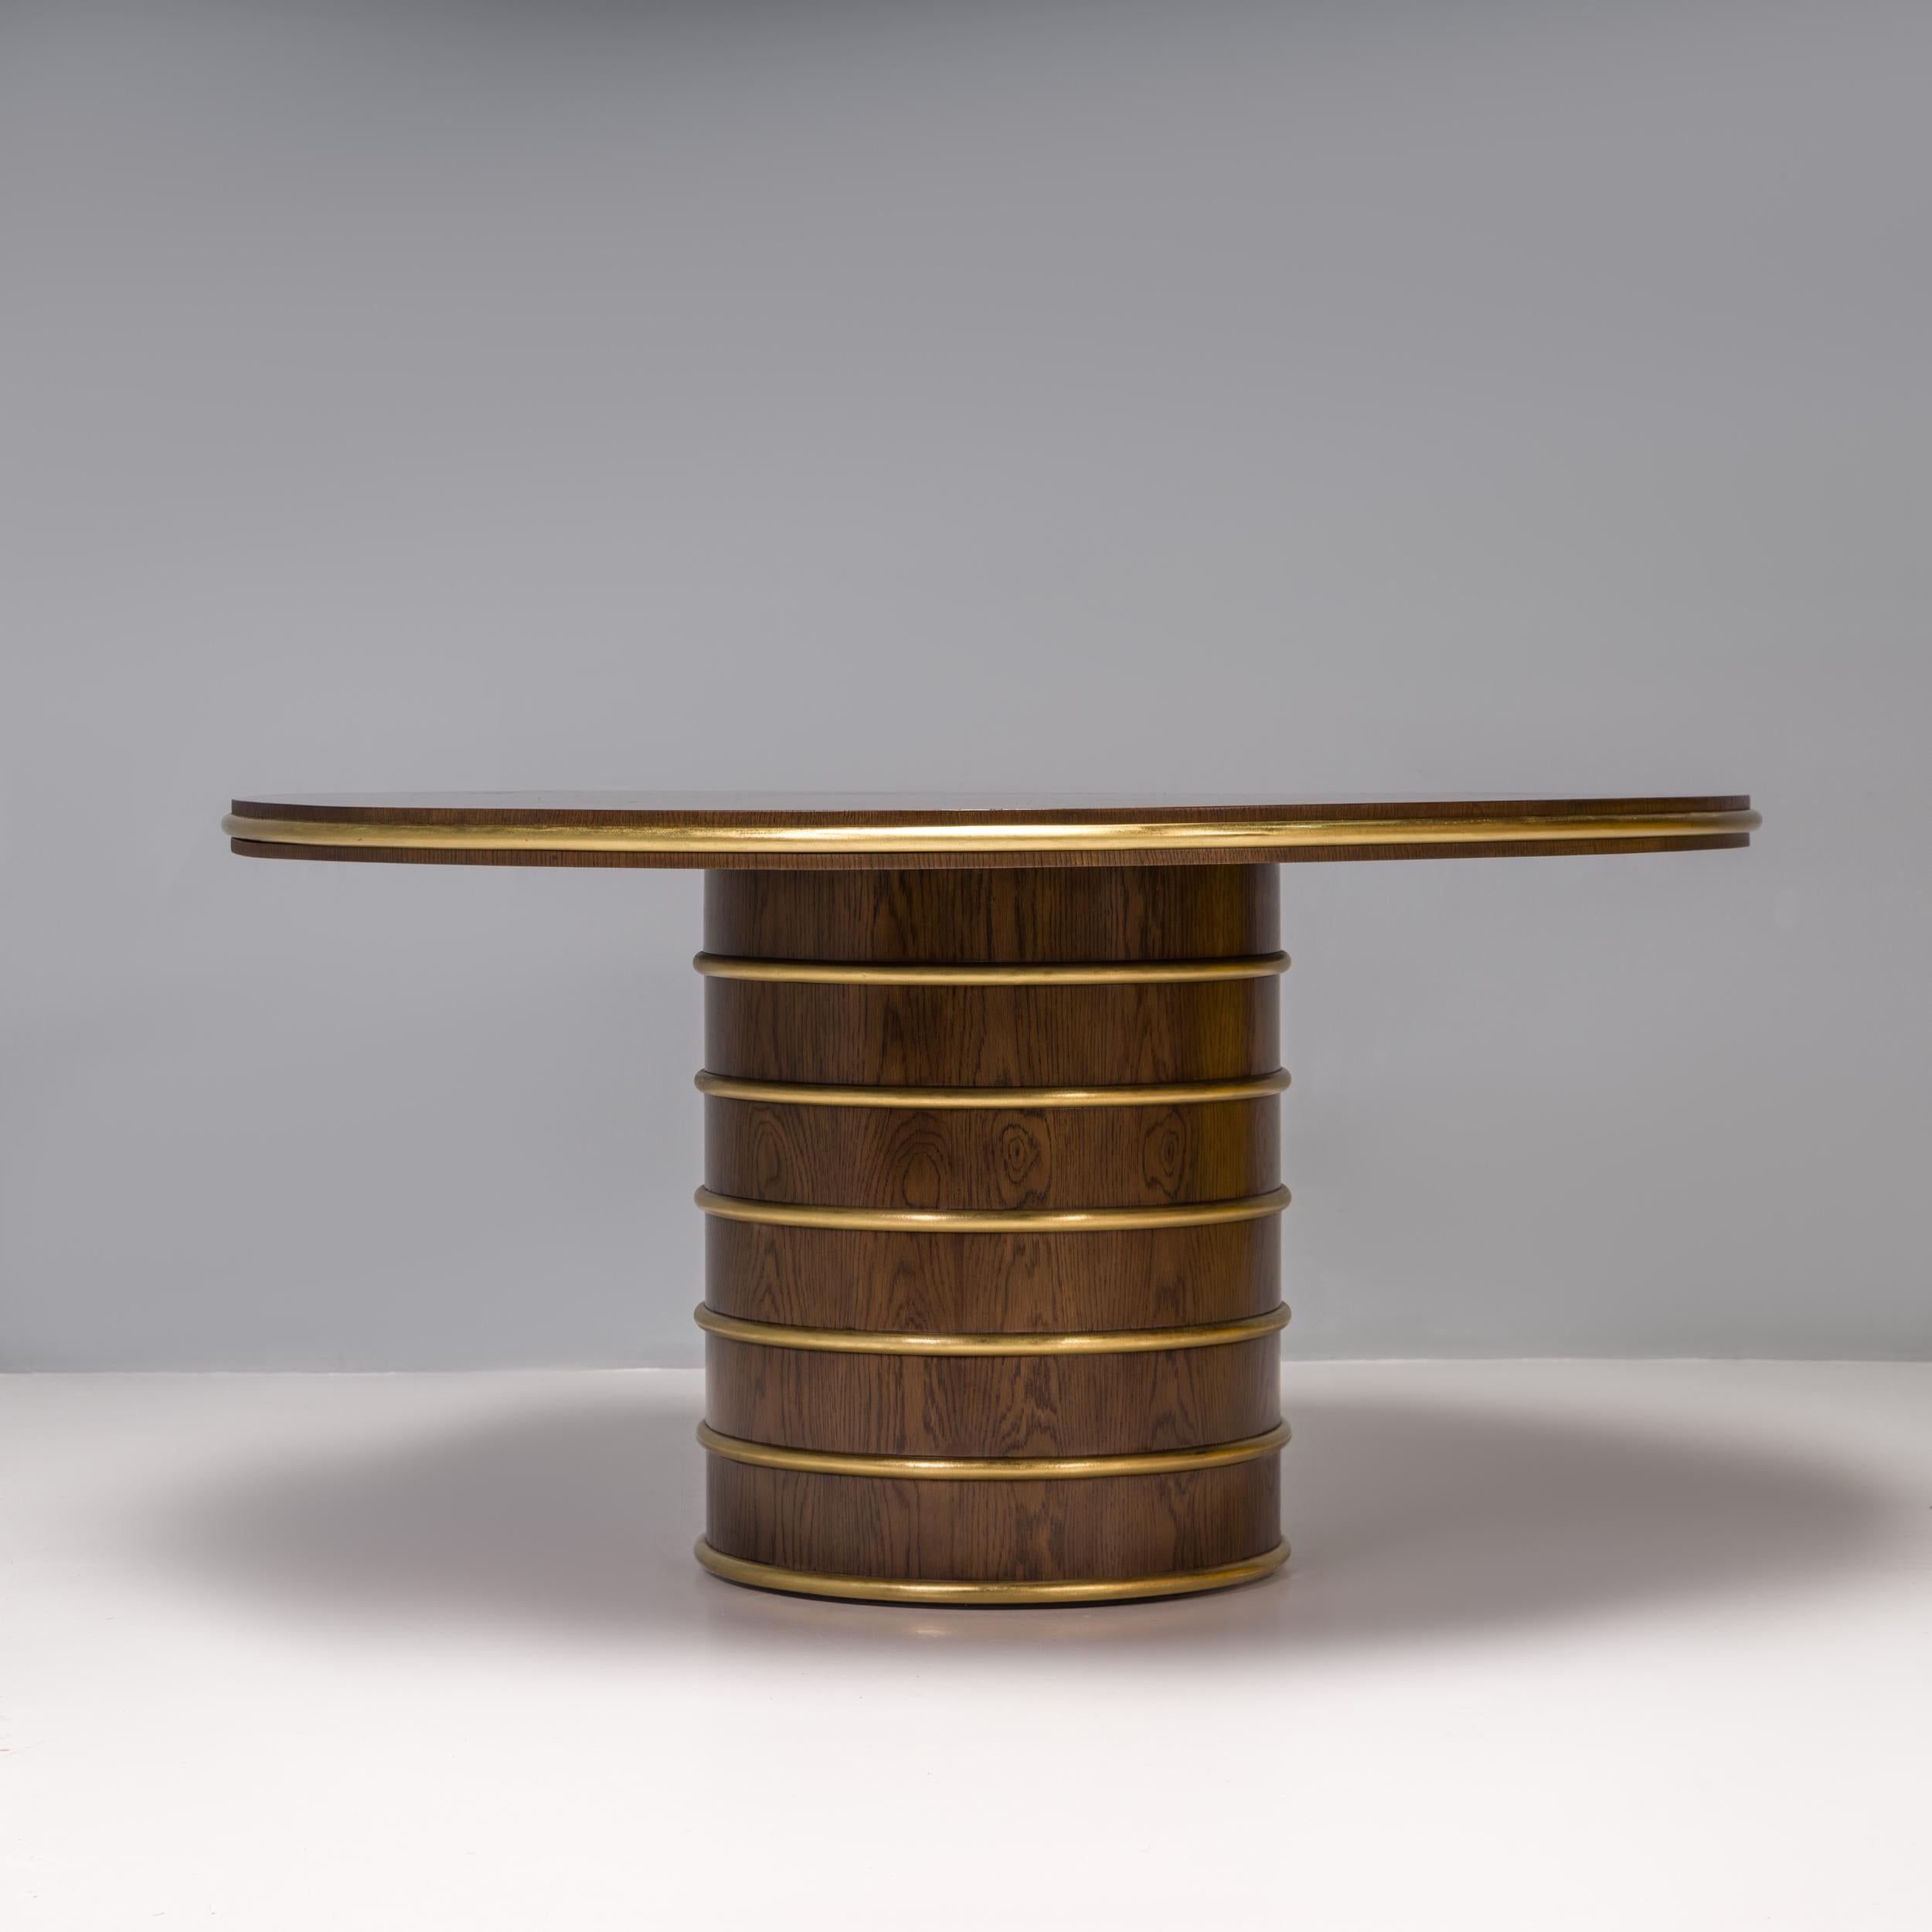 Julian Chichester founded his furniture design company in 1995, inspired by the classic shapes from the 19th and 20th centuries and adding his own unique twist through contemporary finishes and details.

The Madrid dining table is constructed from